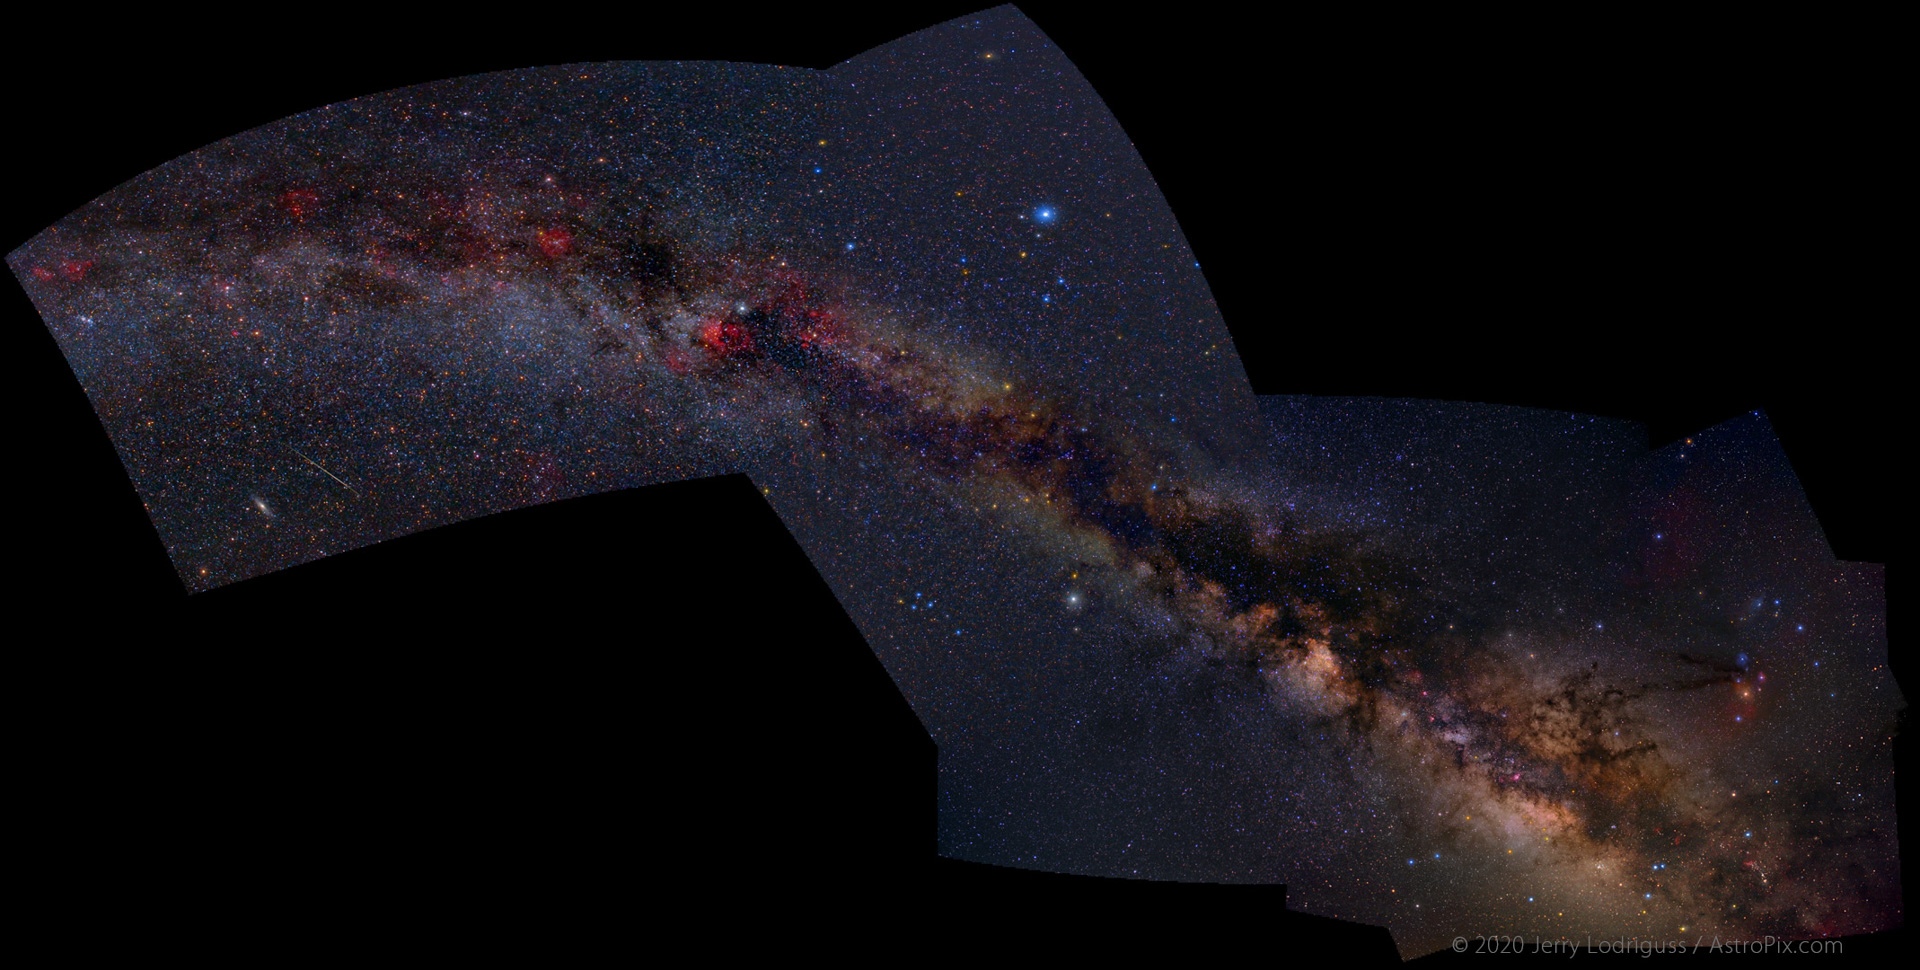 The Milky Way stretches from Perseus at upper left to Scorpius at lower right in this panorama image.